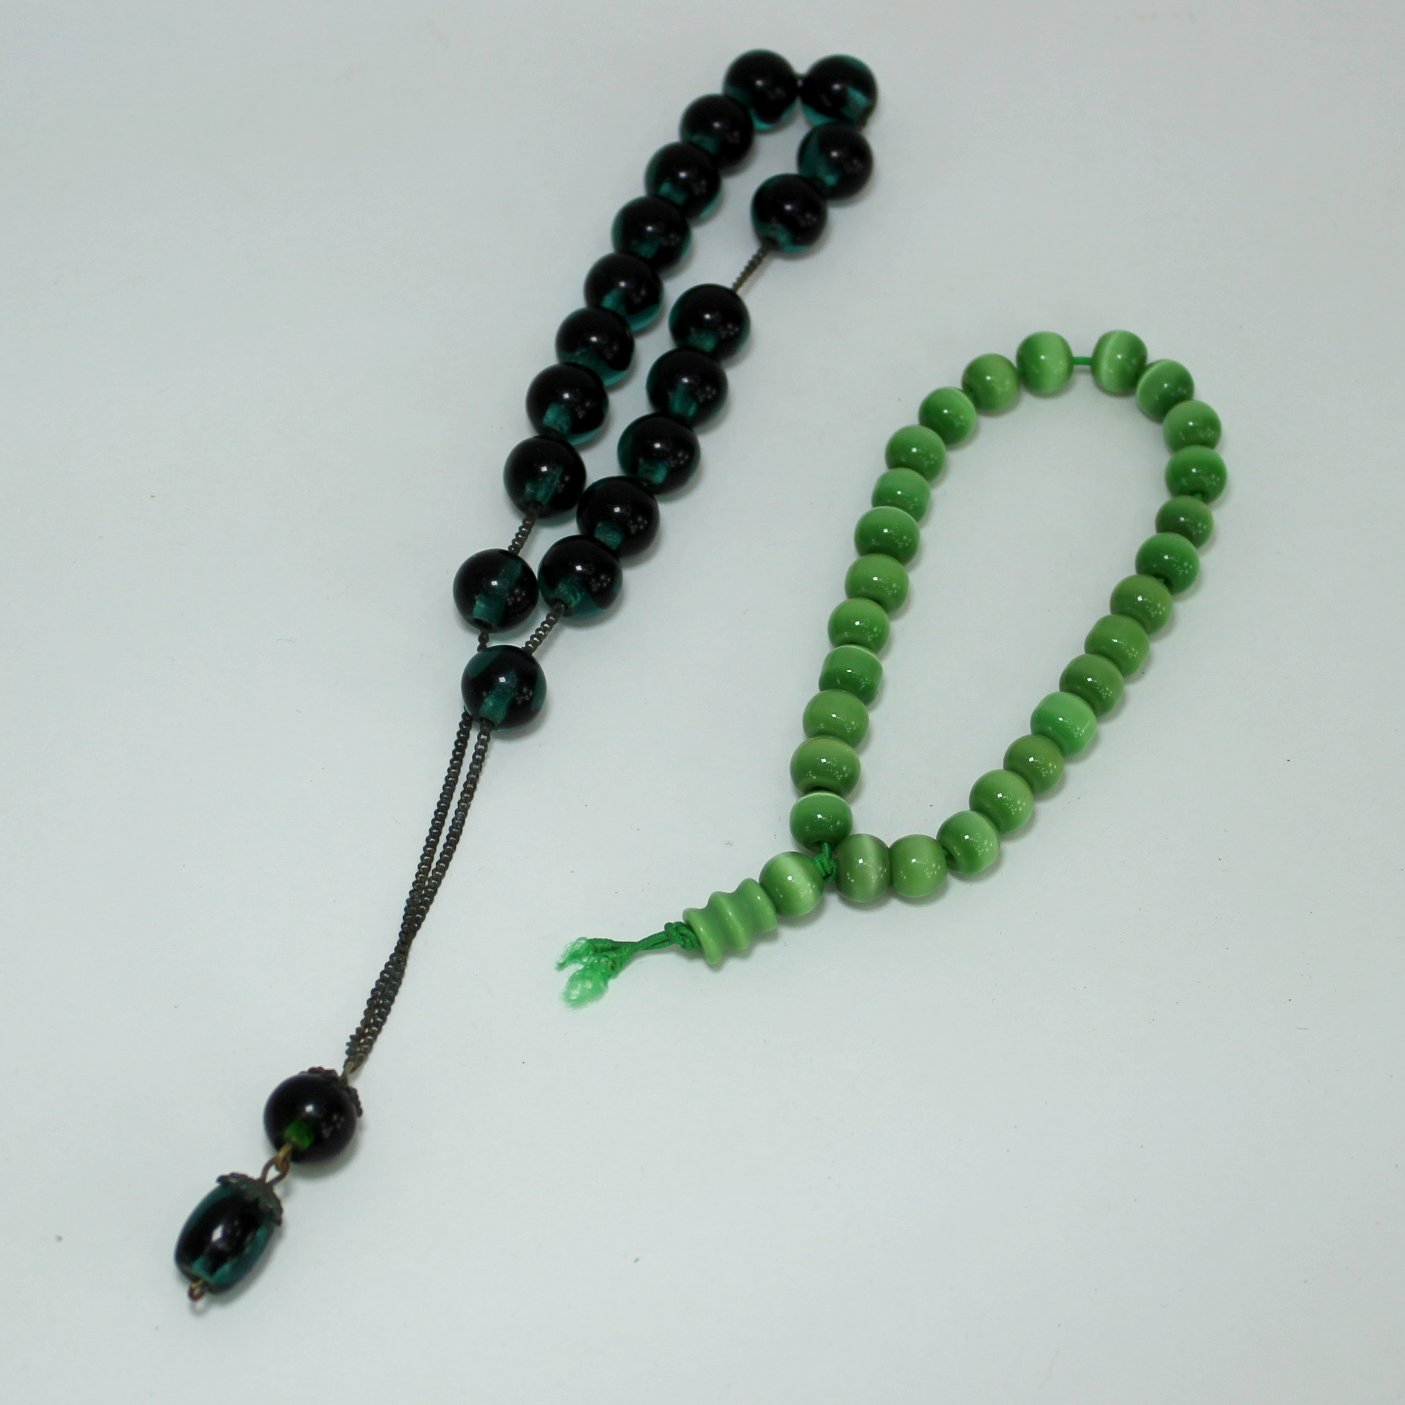 Prayer Beads Vintage on Chain Newer Cord Strung 2 Sets note lovely coloring of black beads